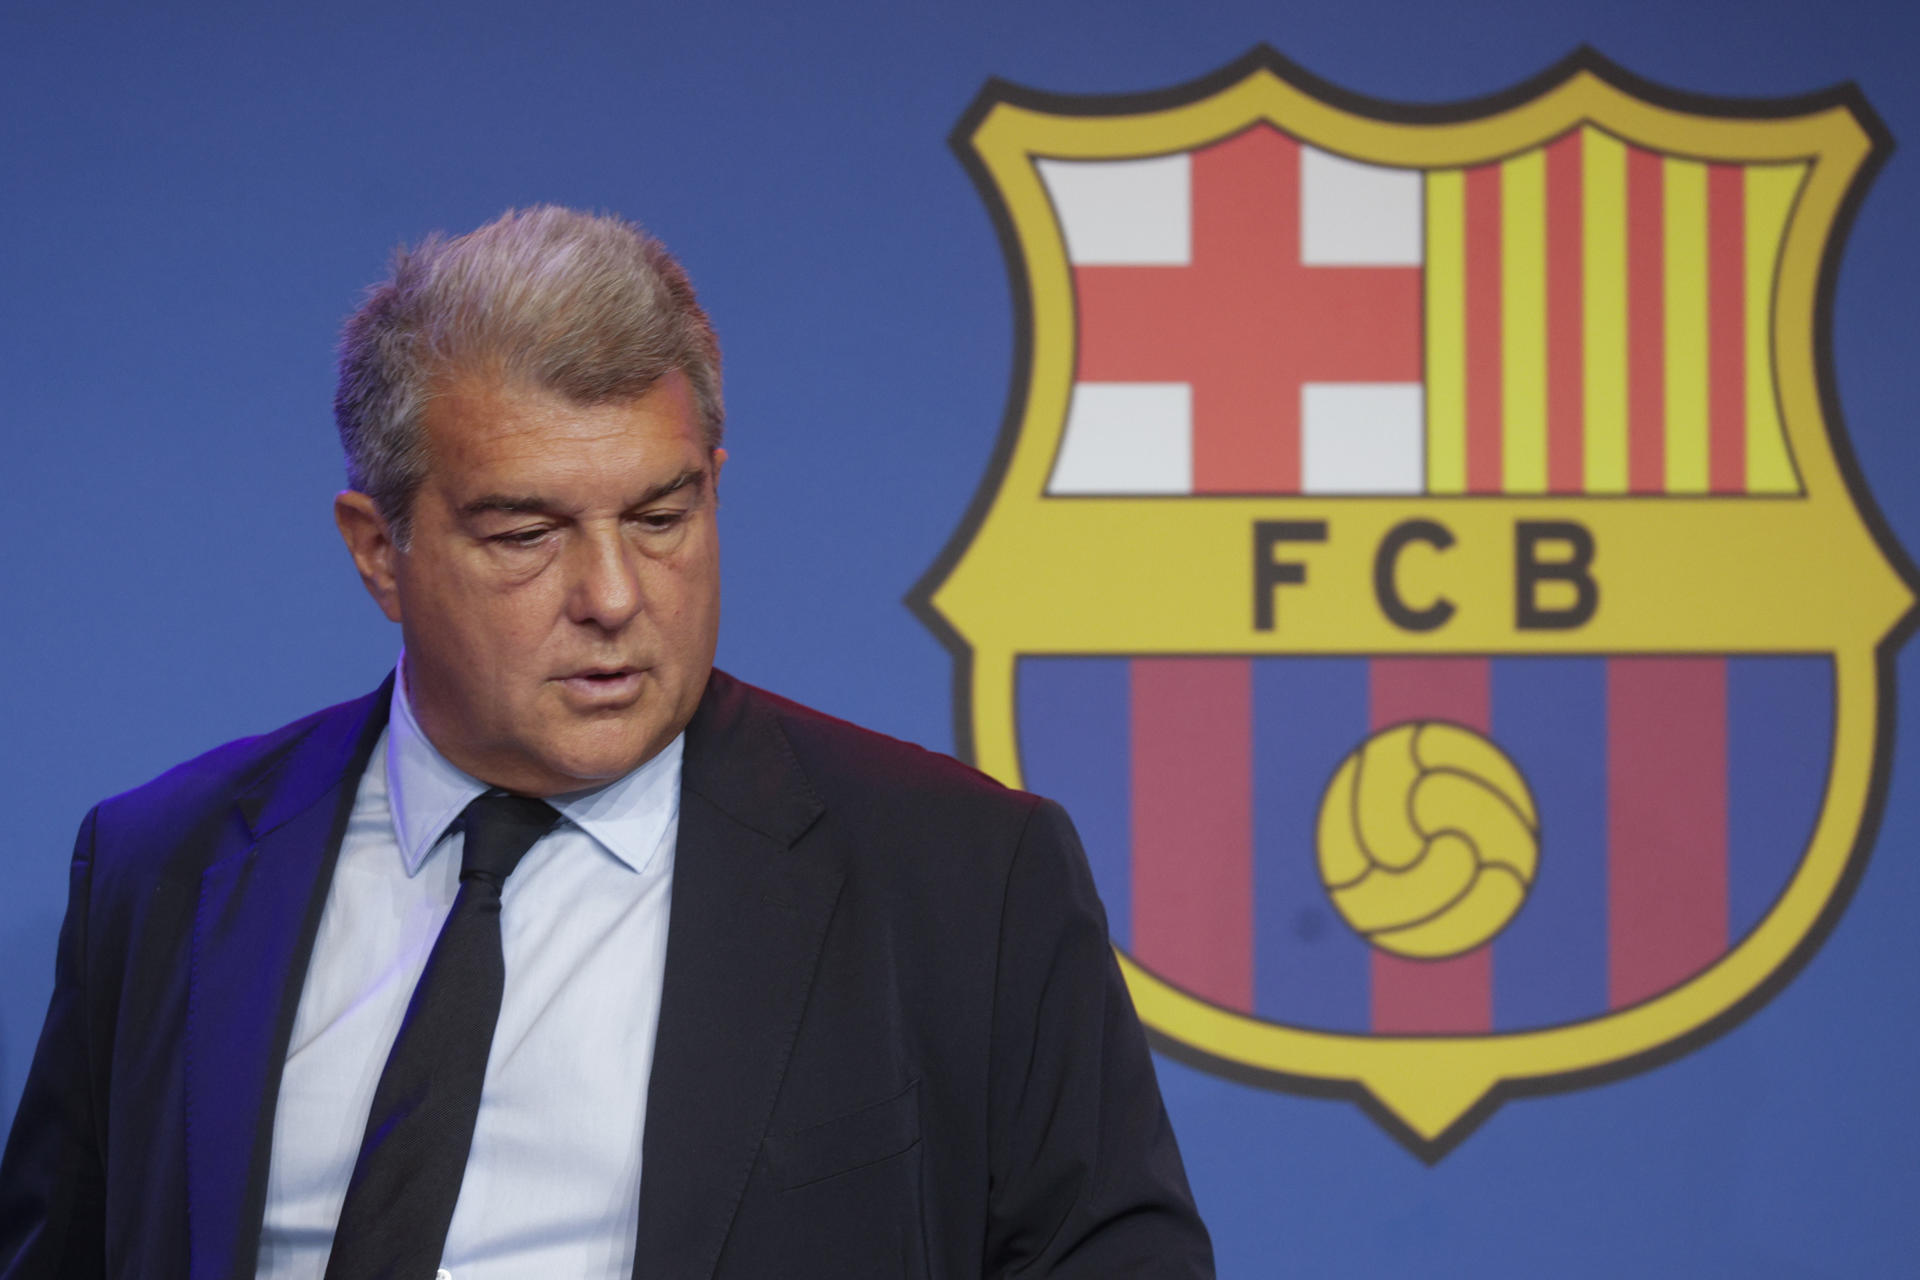 "I see a splendid Barca with titles in five years' time"